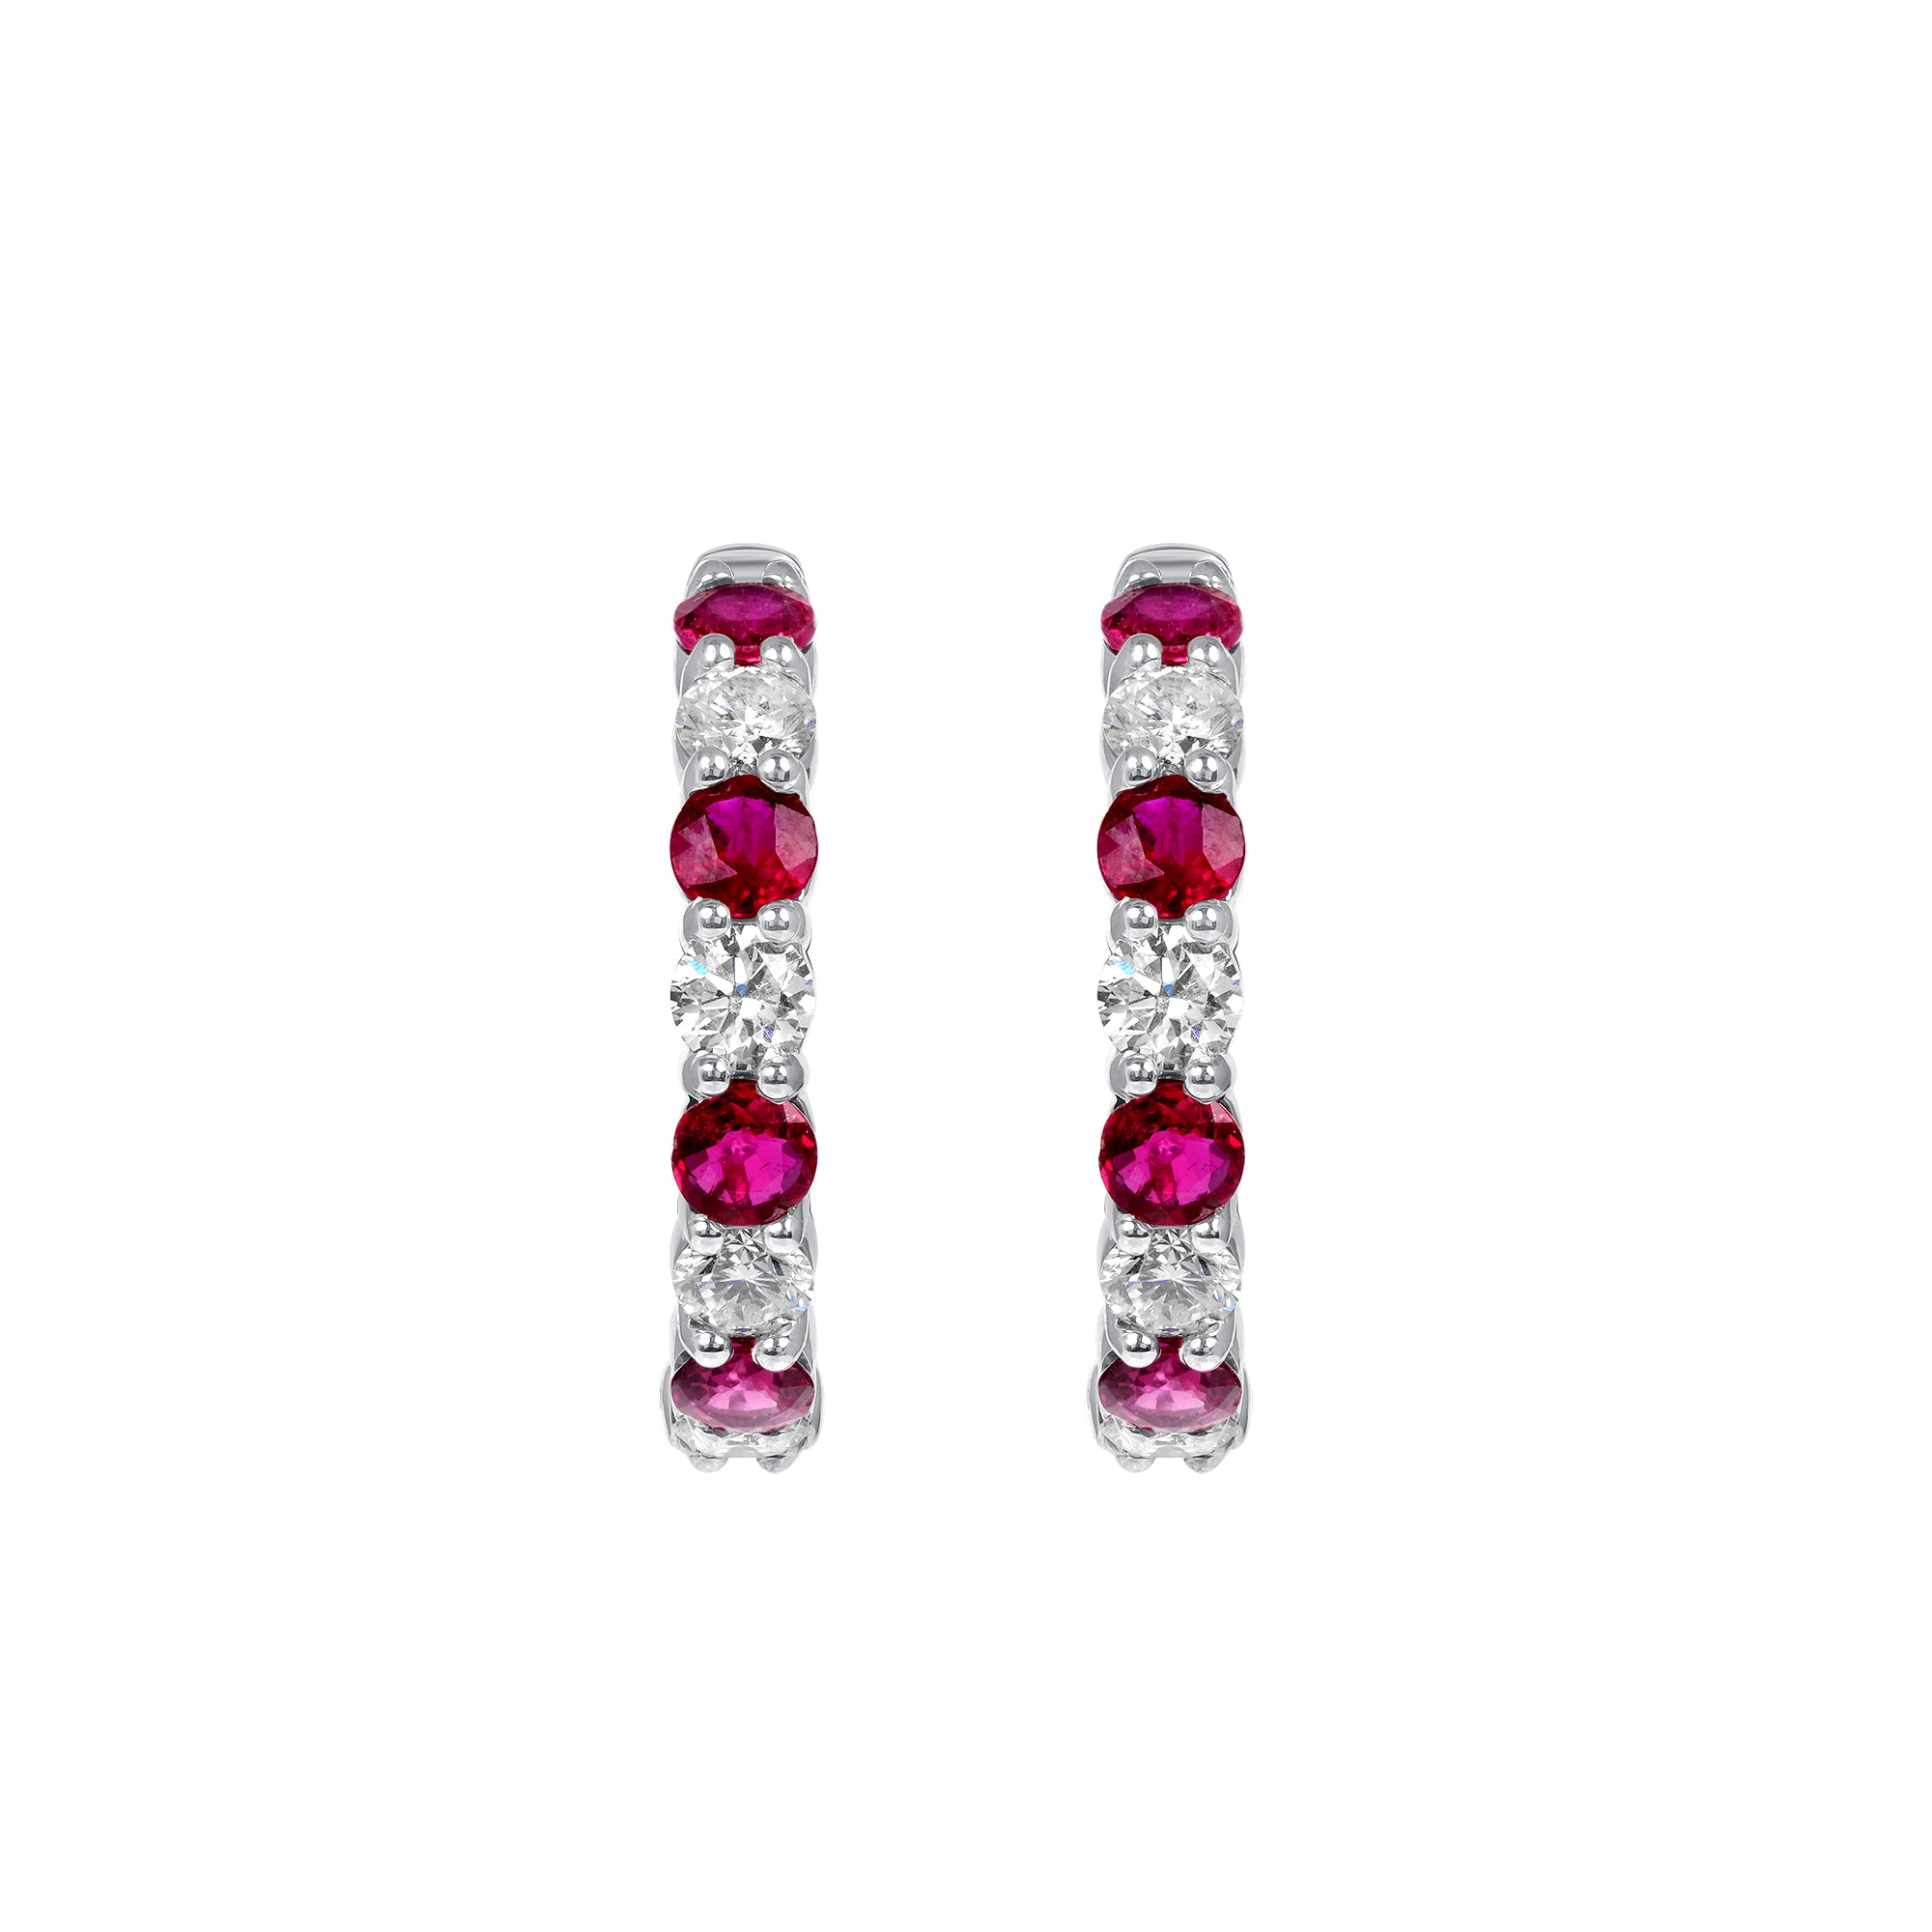 4.41 CT. Alternating Round Brilliant Diamond and Ruby Hoop Earrings in 14K White Gold